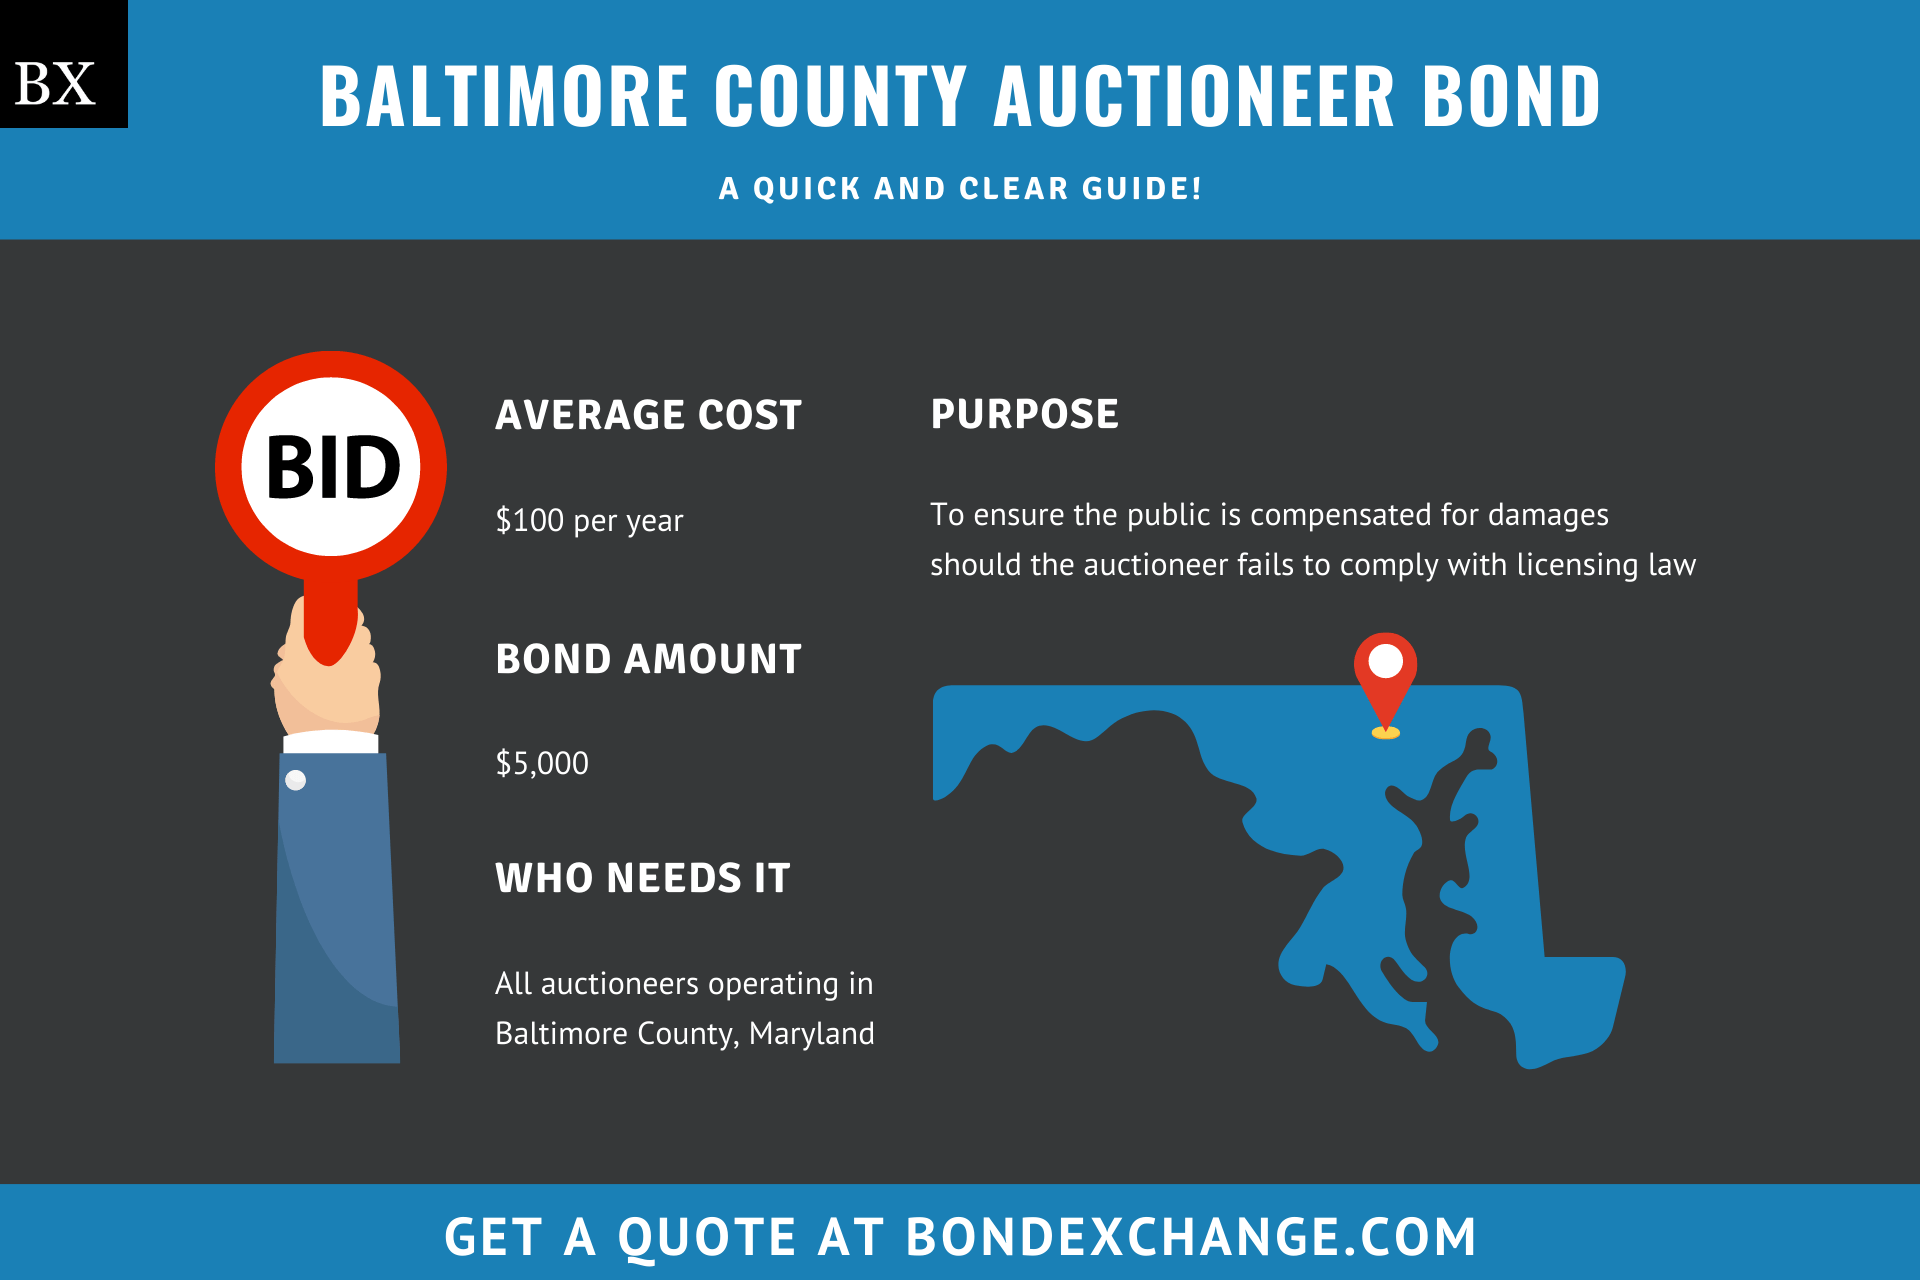 Baltimore County Auctioneer Bond